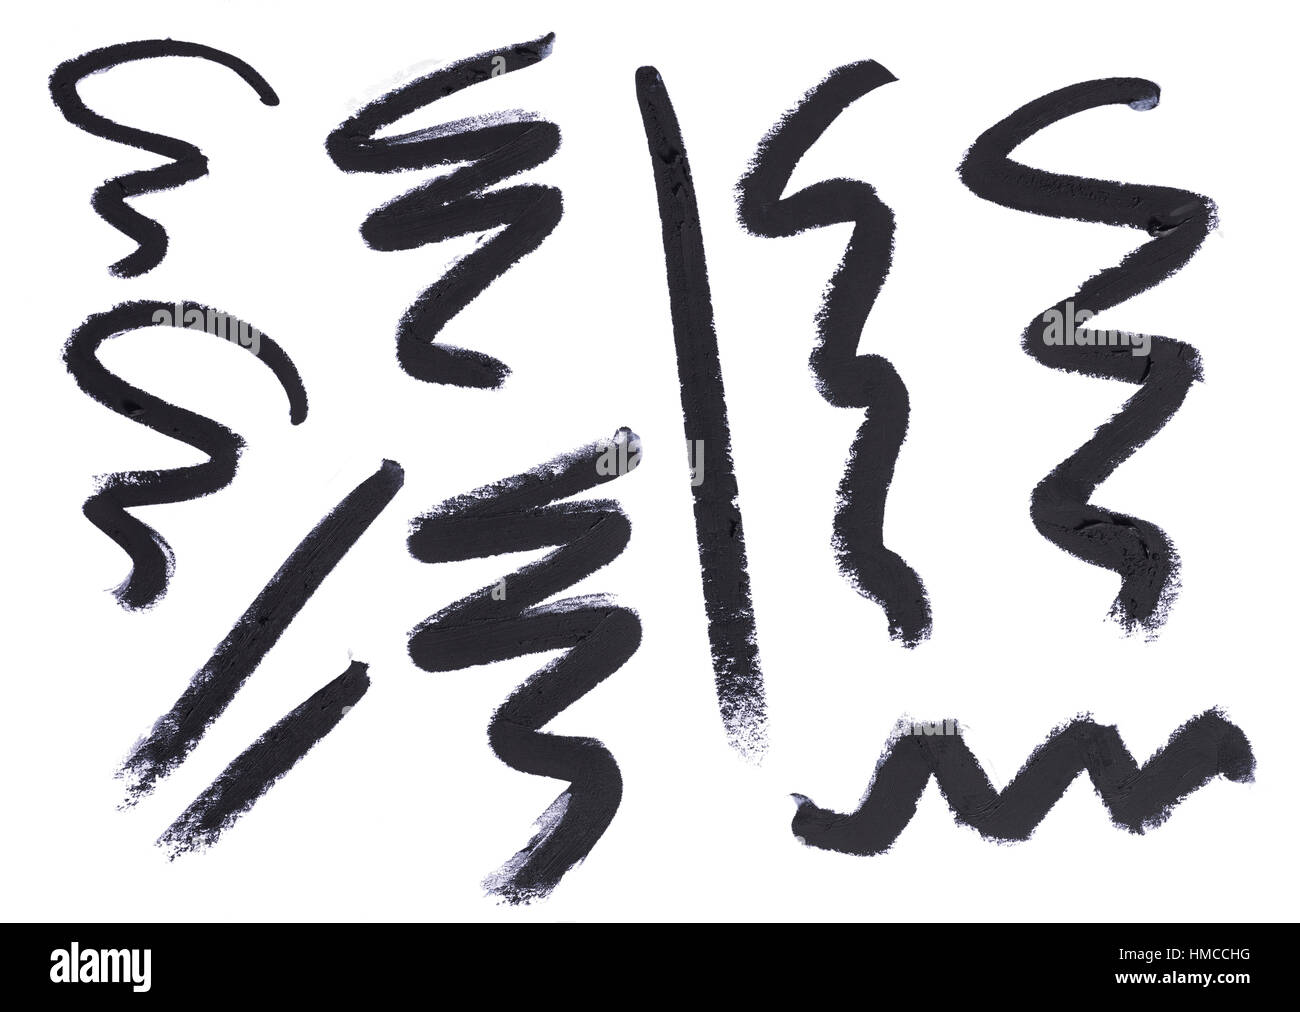 A cut out beauty image of a sample of black make up pencil or eye liner squiggles,lines or zig zag shapes Stock Photo